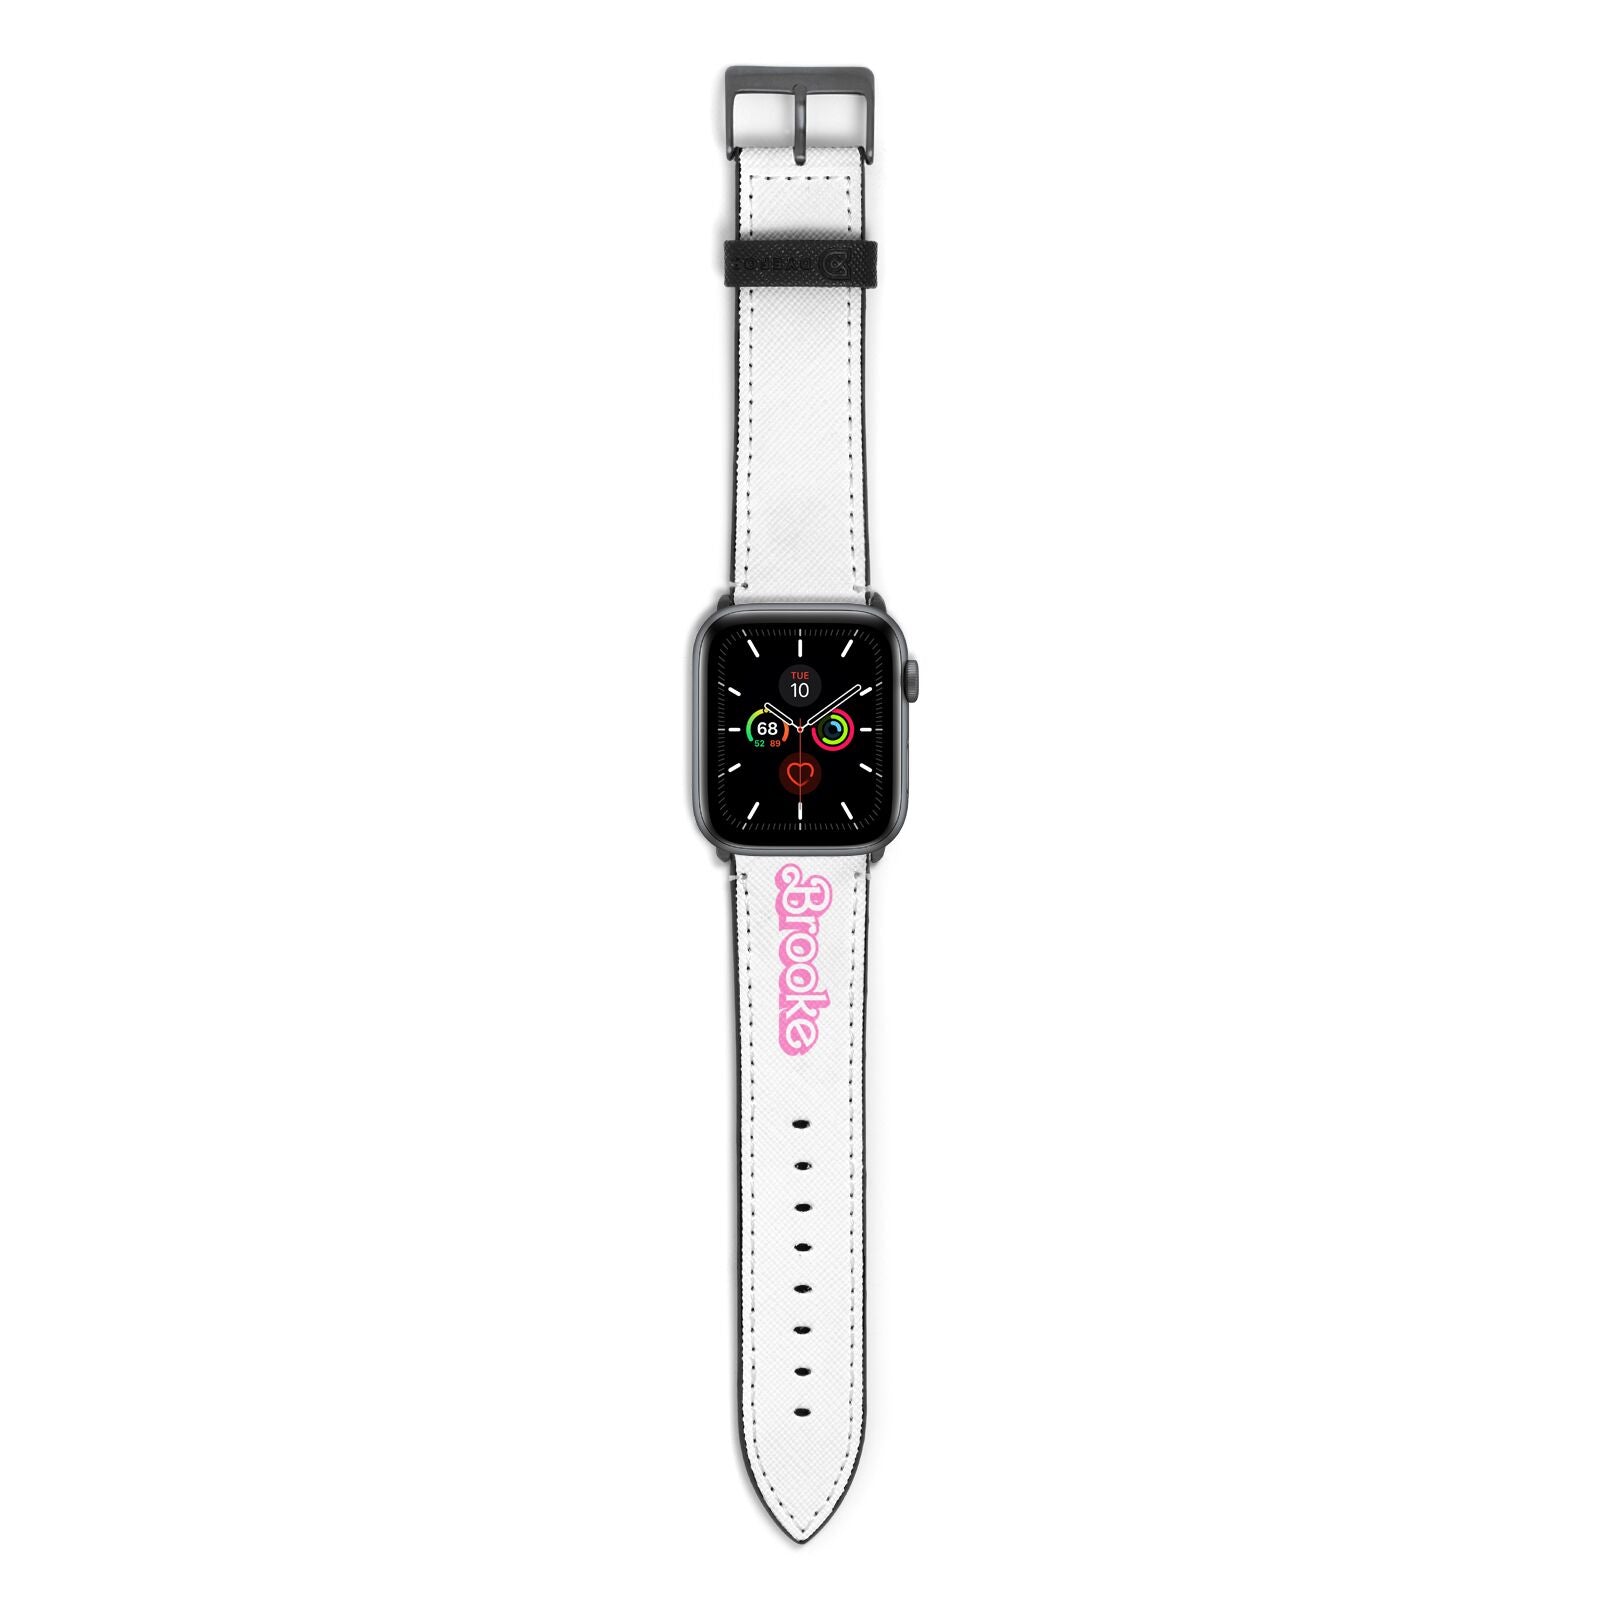 Dream Name Apple Watch Strap with Space Grey Hardware